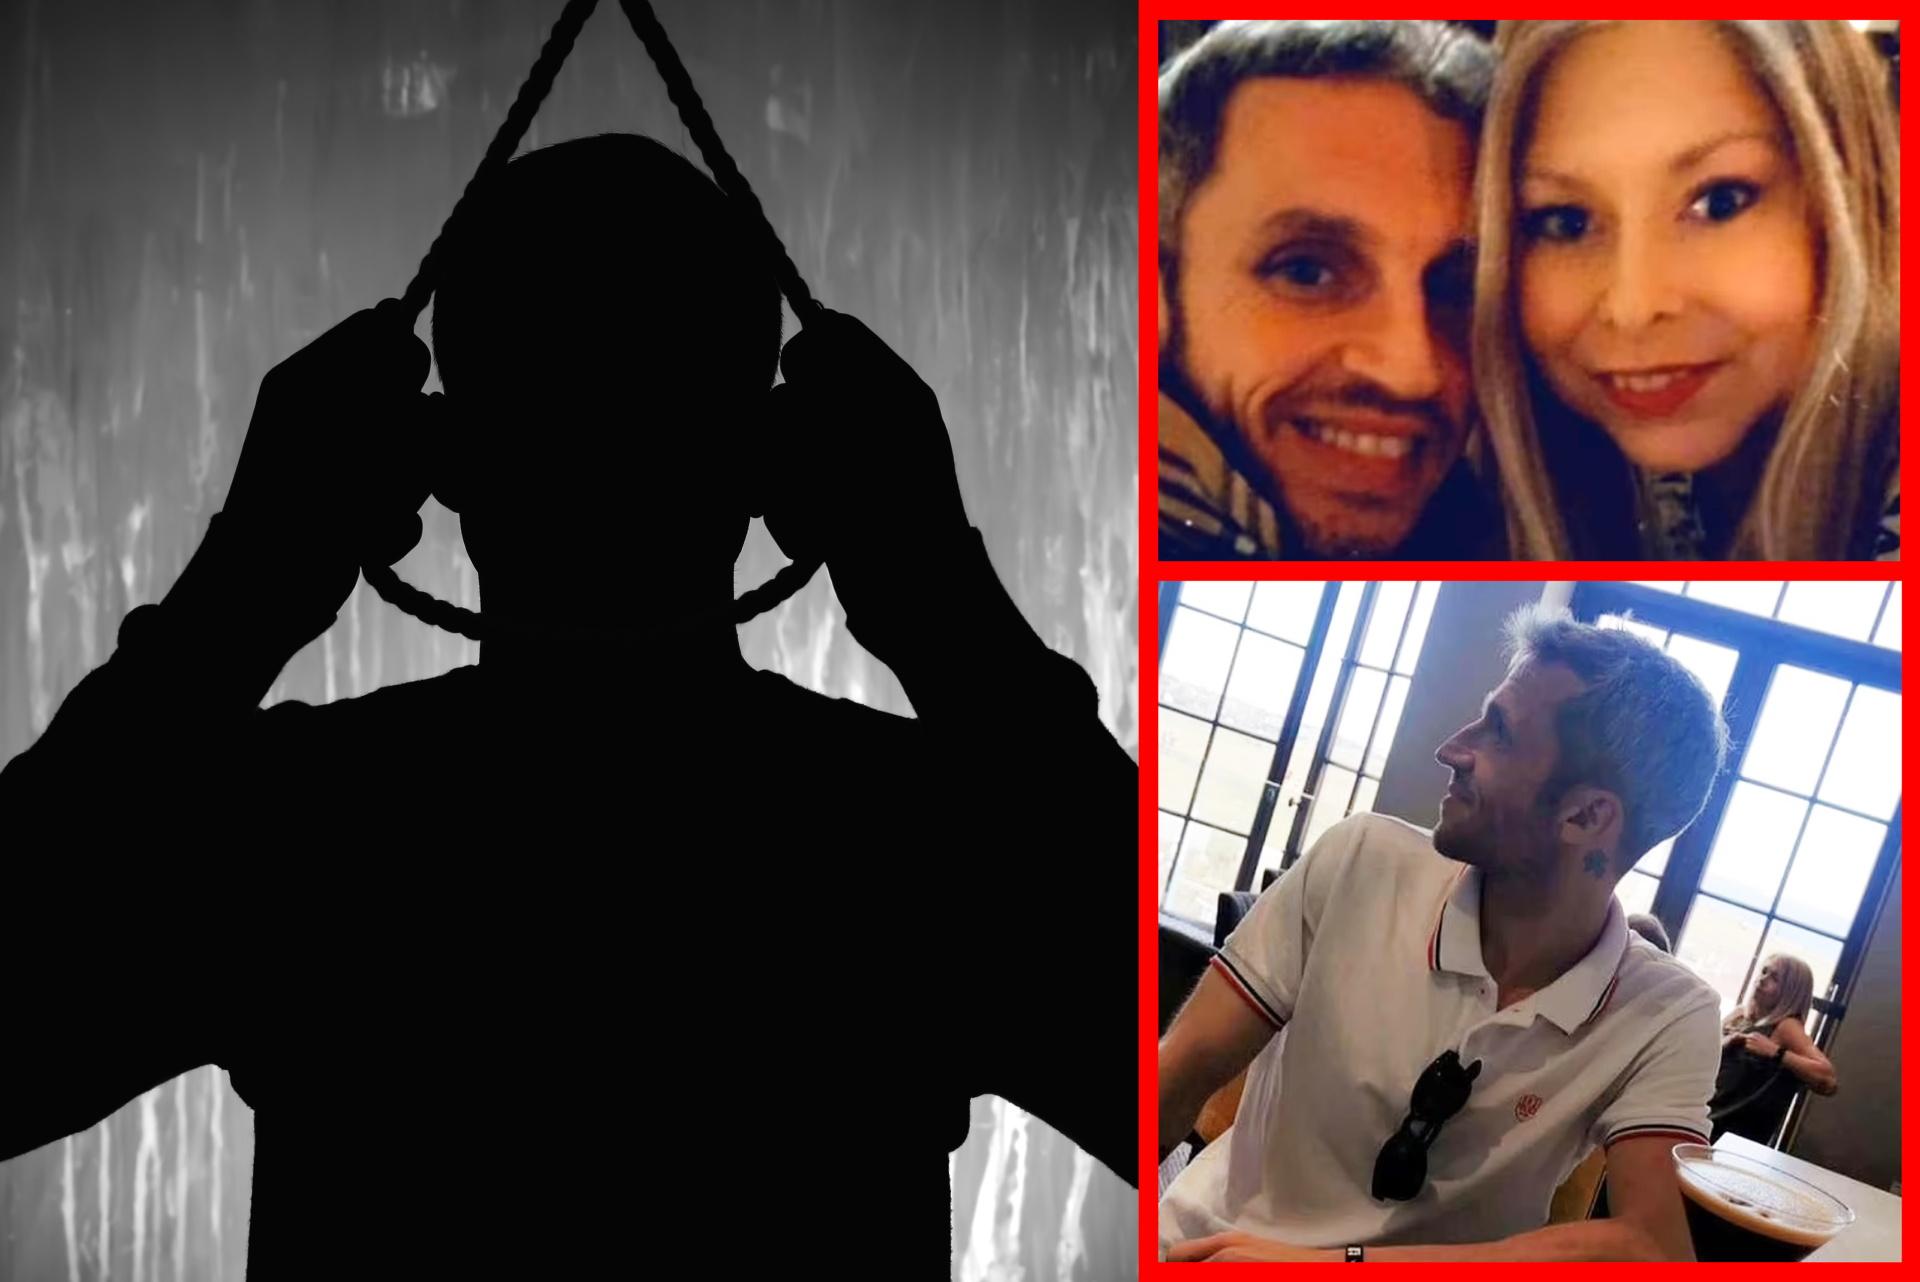 He spoiled his fiancée that he hanged himself.  He actually did it by accident!  Watch the horror movie Super Express